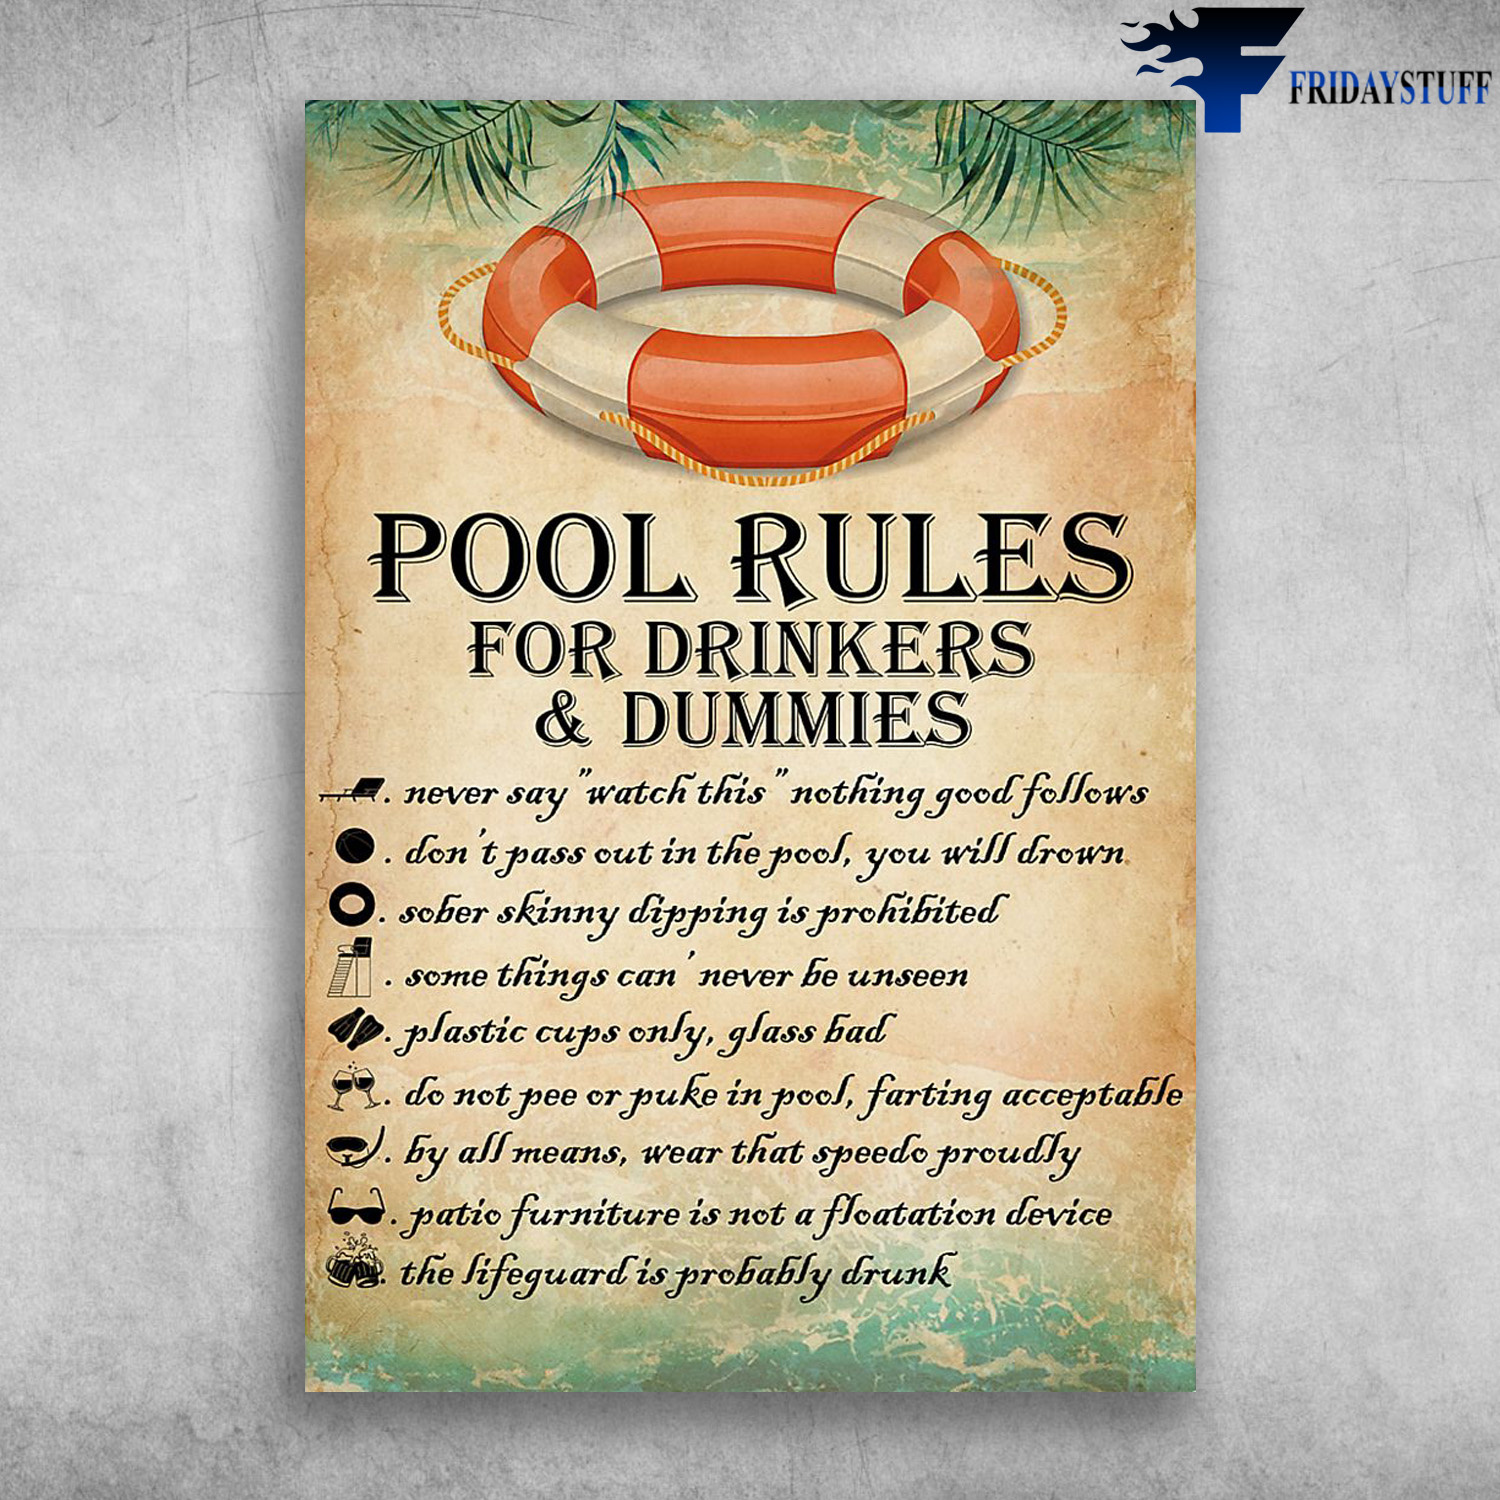 Poll Rules - Pool Rules For Drinkers And Dummies, Never Say Watch This Nothing Good Follows, Sover Skinny Dipping Is Prohibited, Somethings Can Never Be Unseen, Plastic Cups Only, Glass Bad